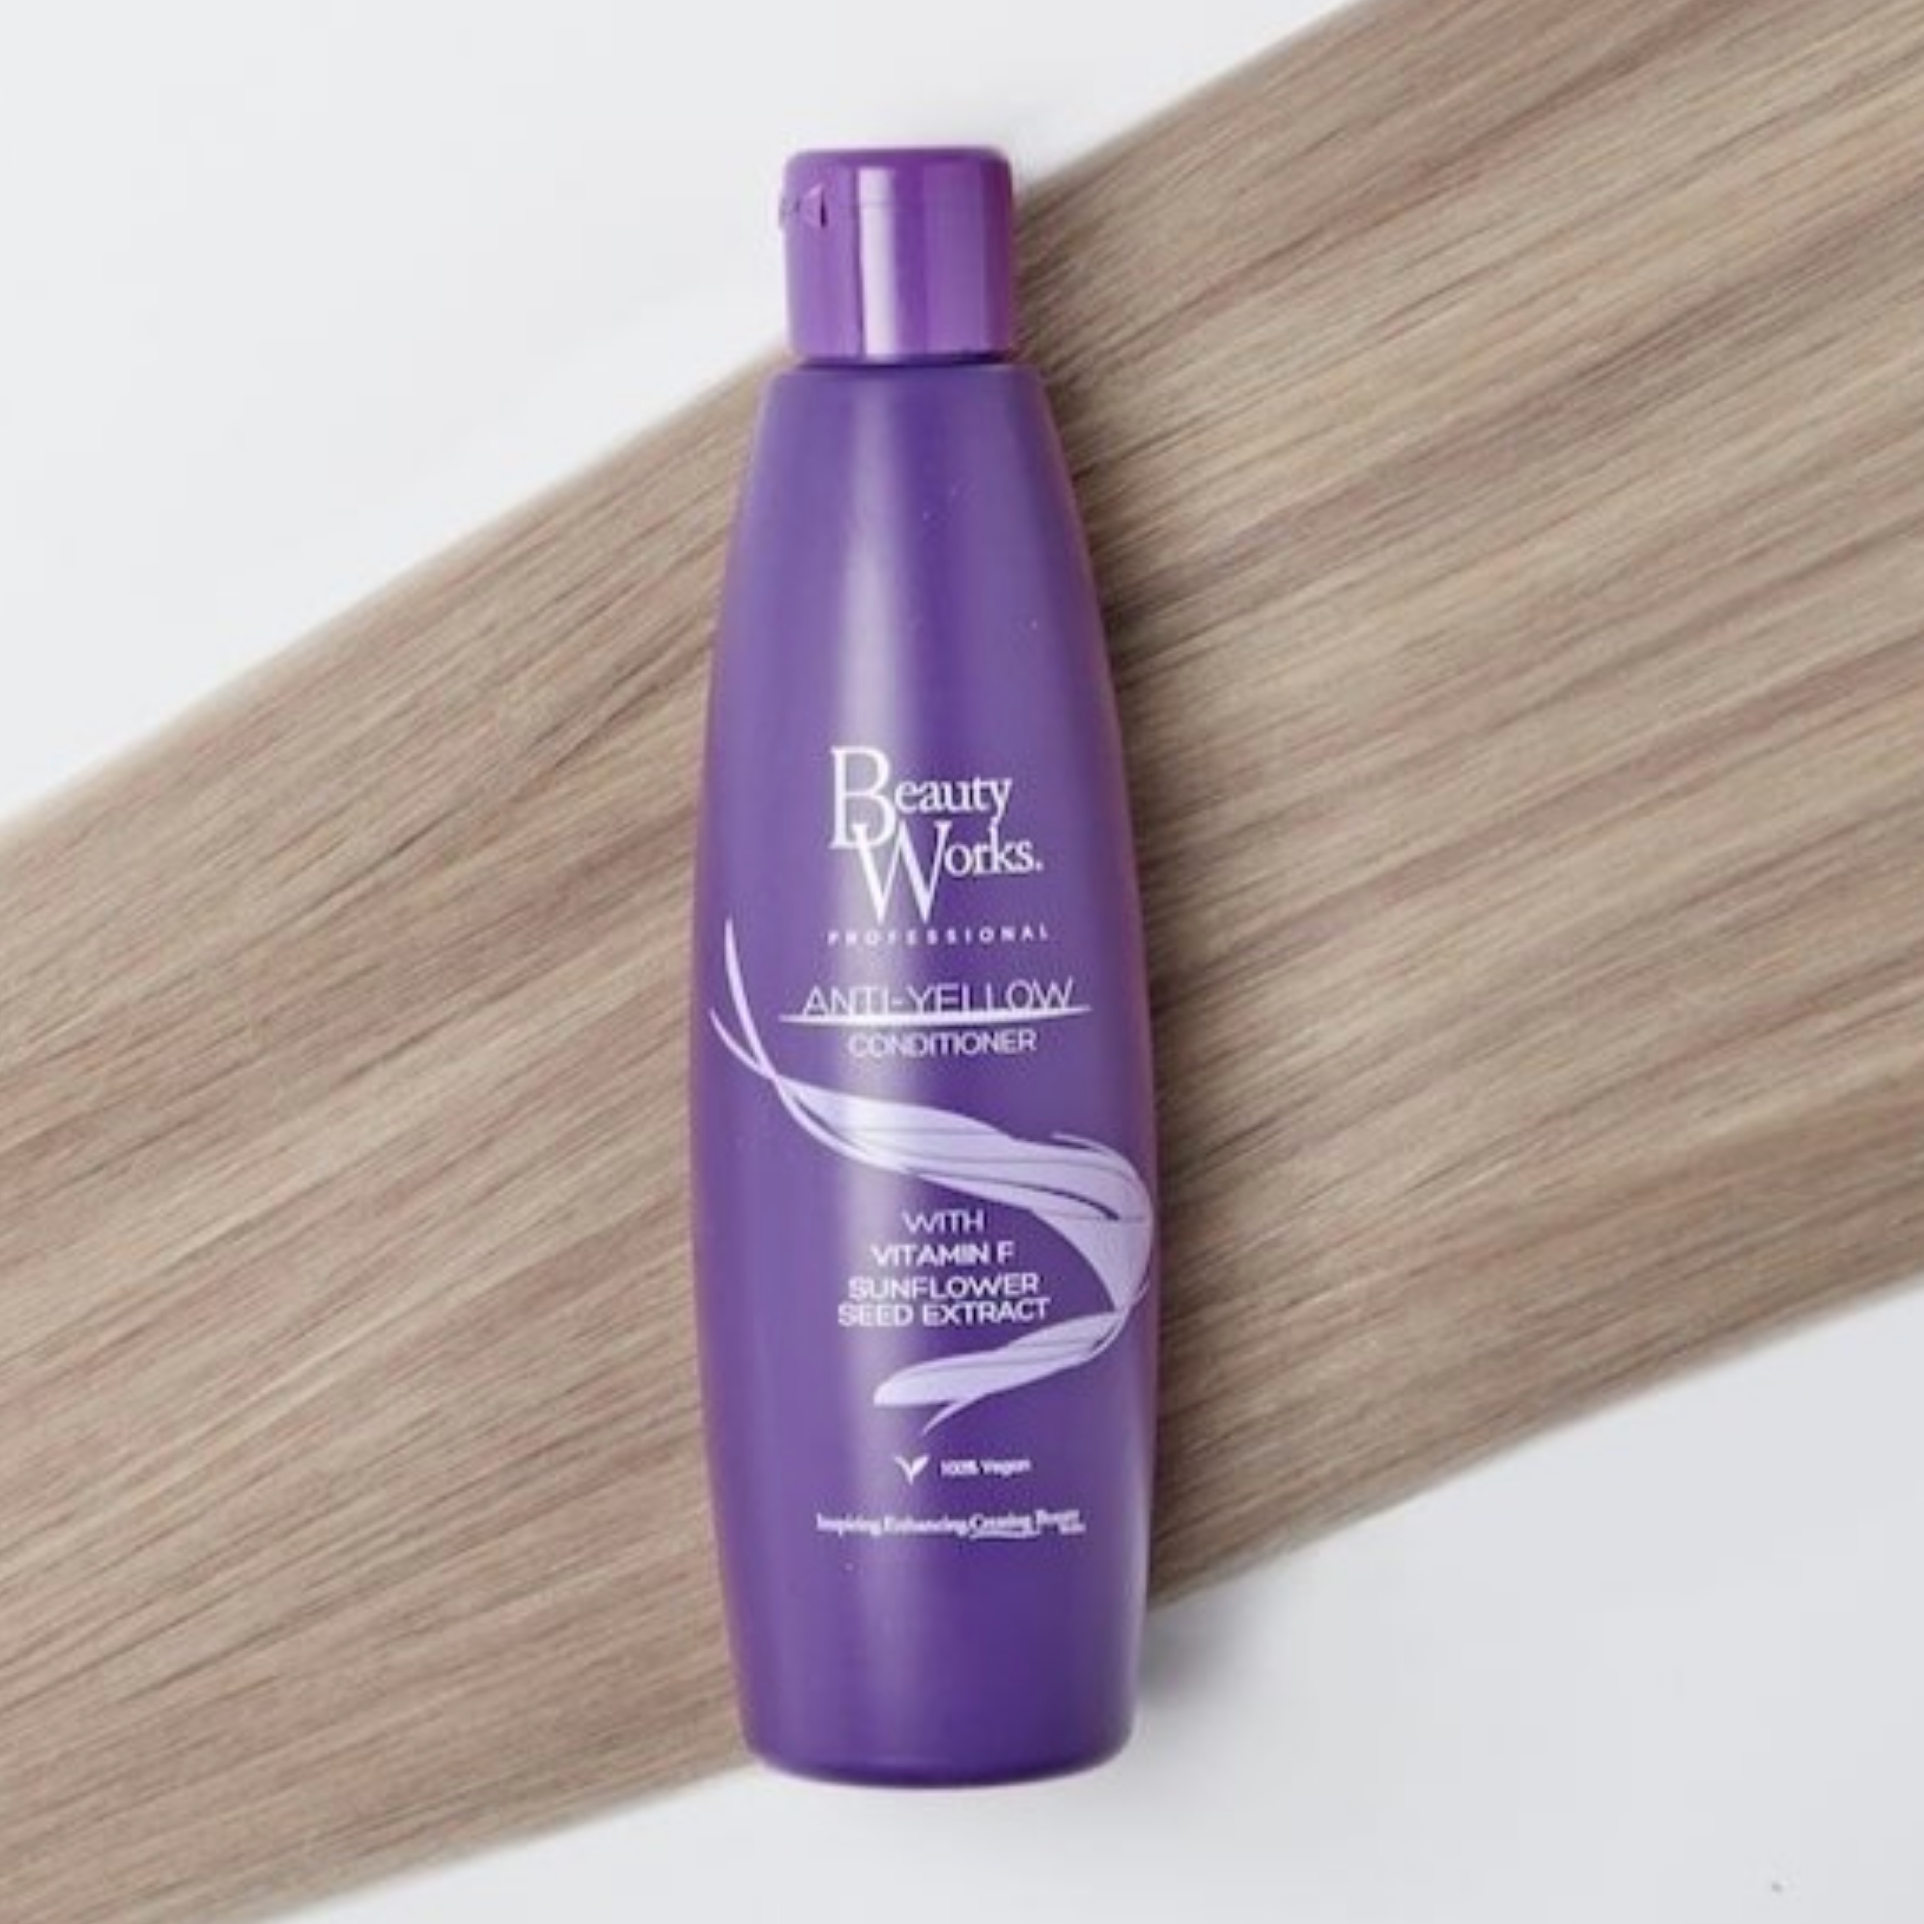 Beauty Works Anti Yellow Conditioner 250ml, with blonde hair